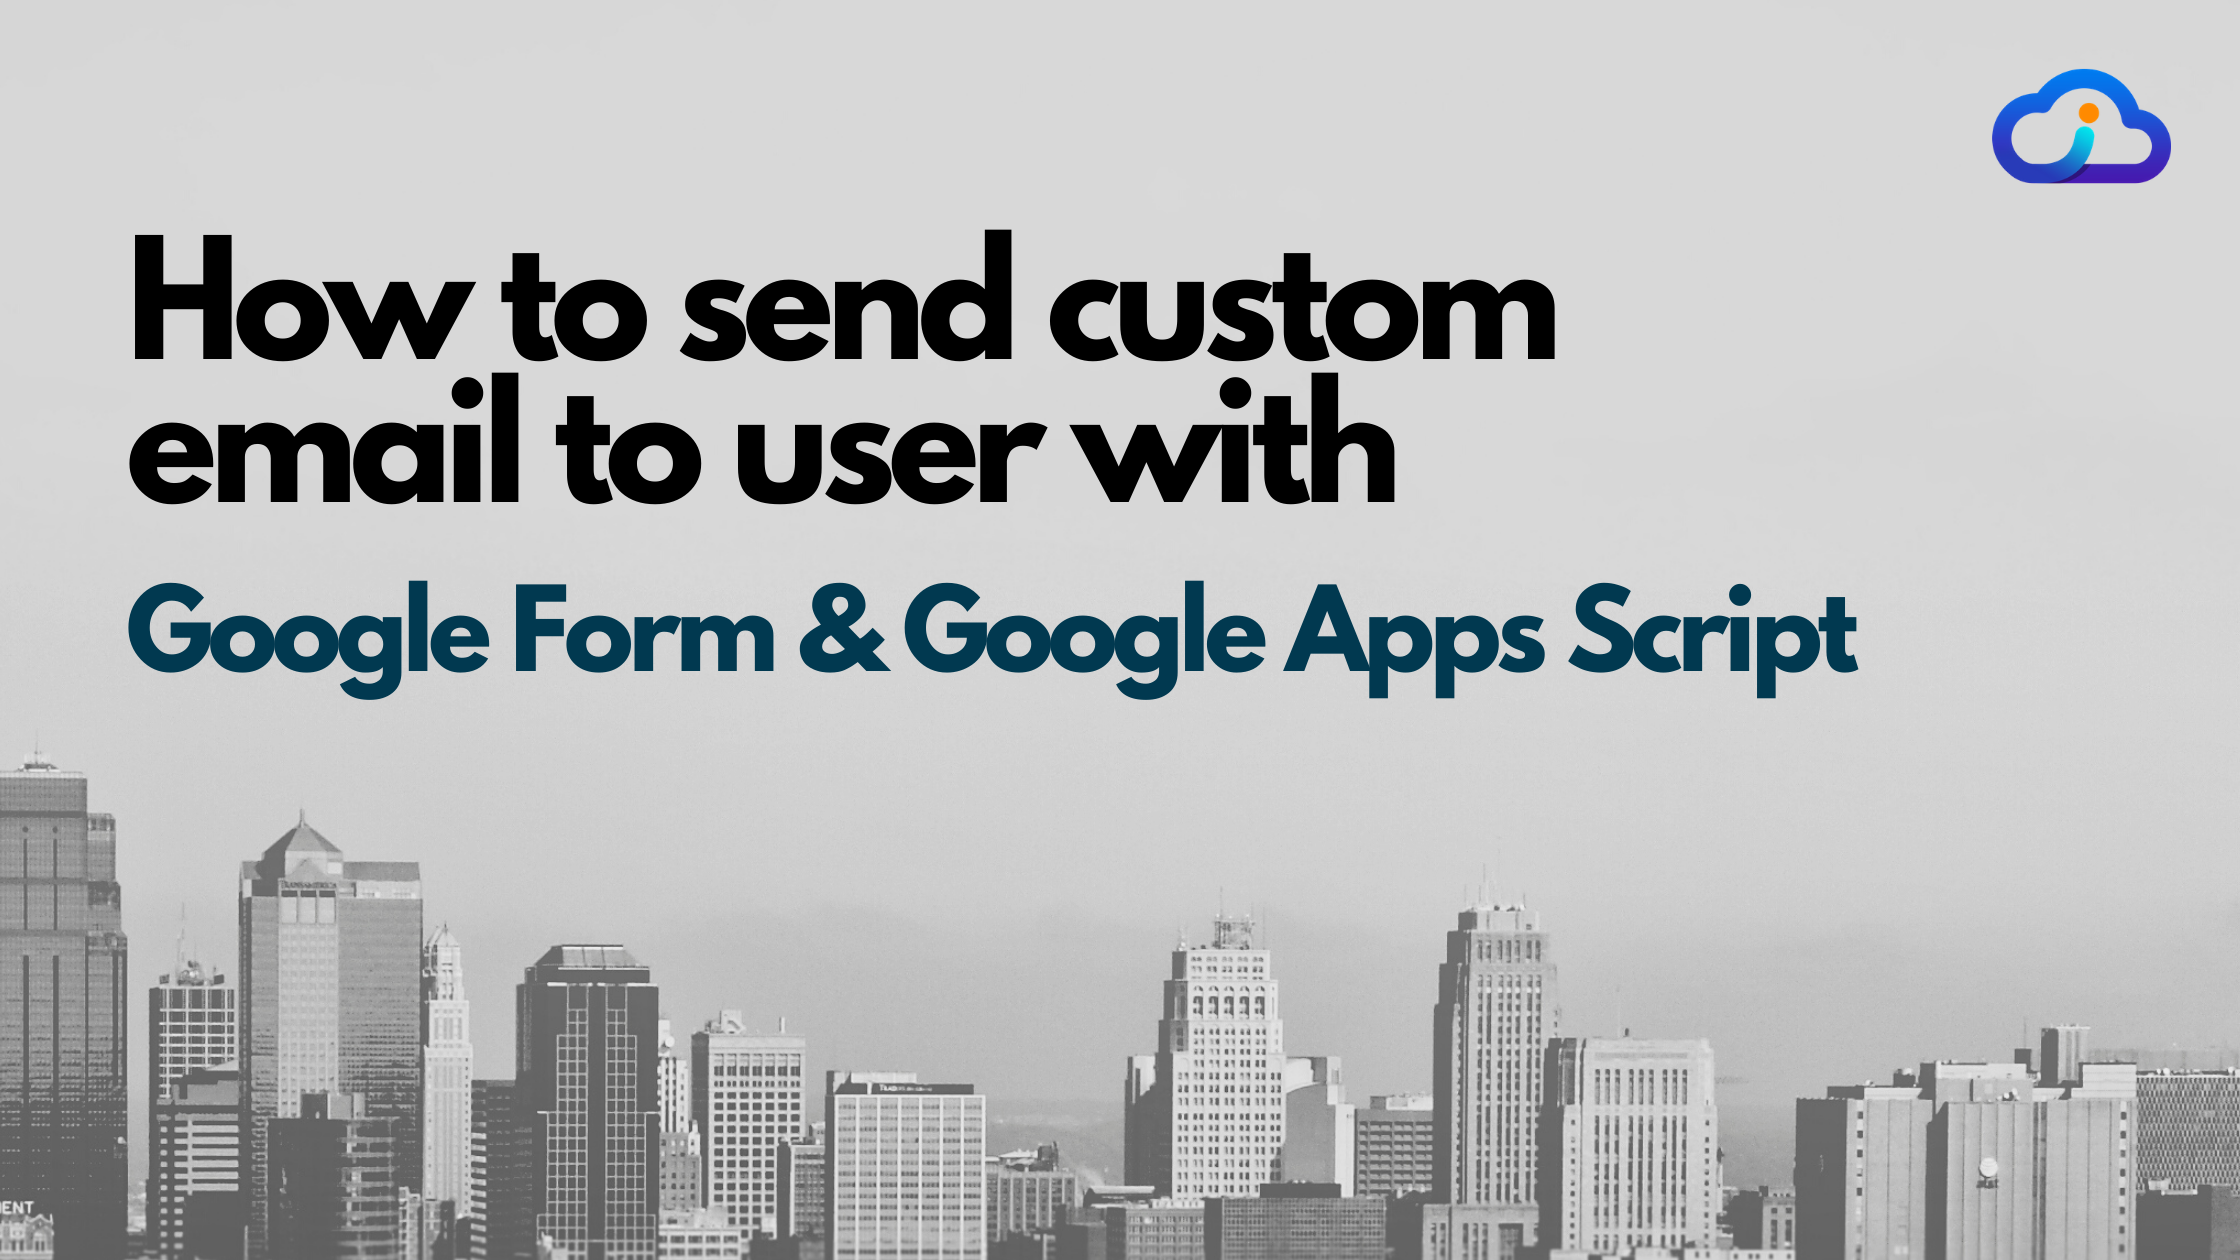 How to send custom email to user with Google Form